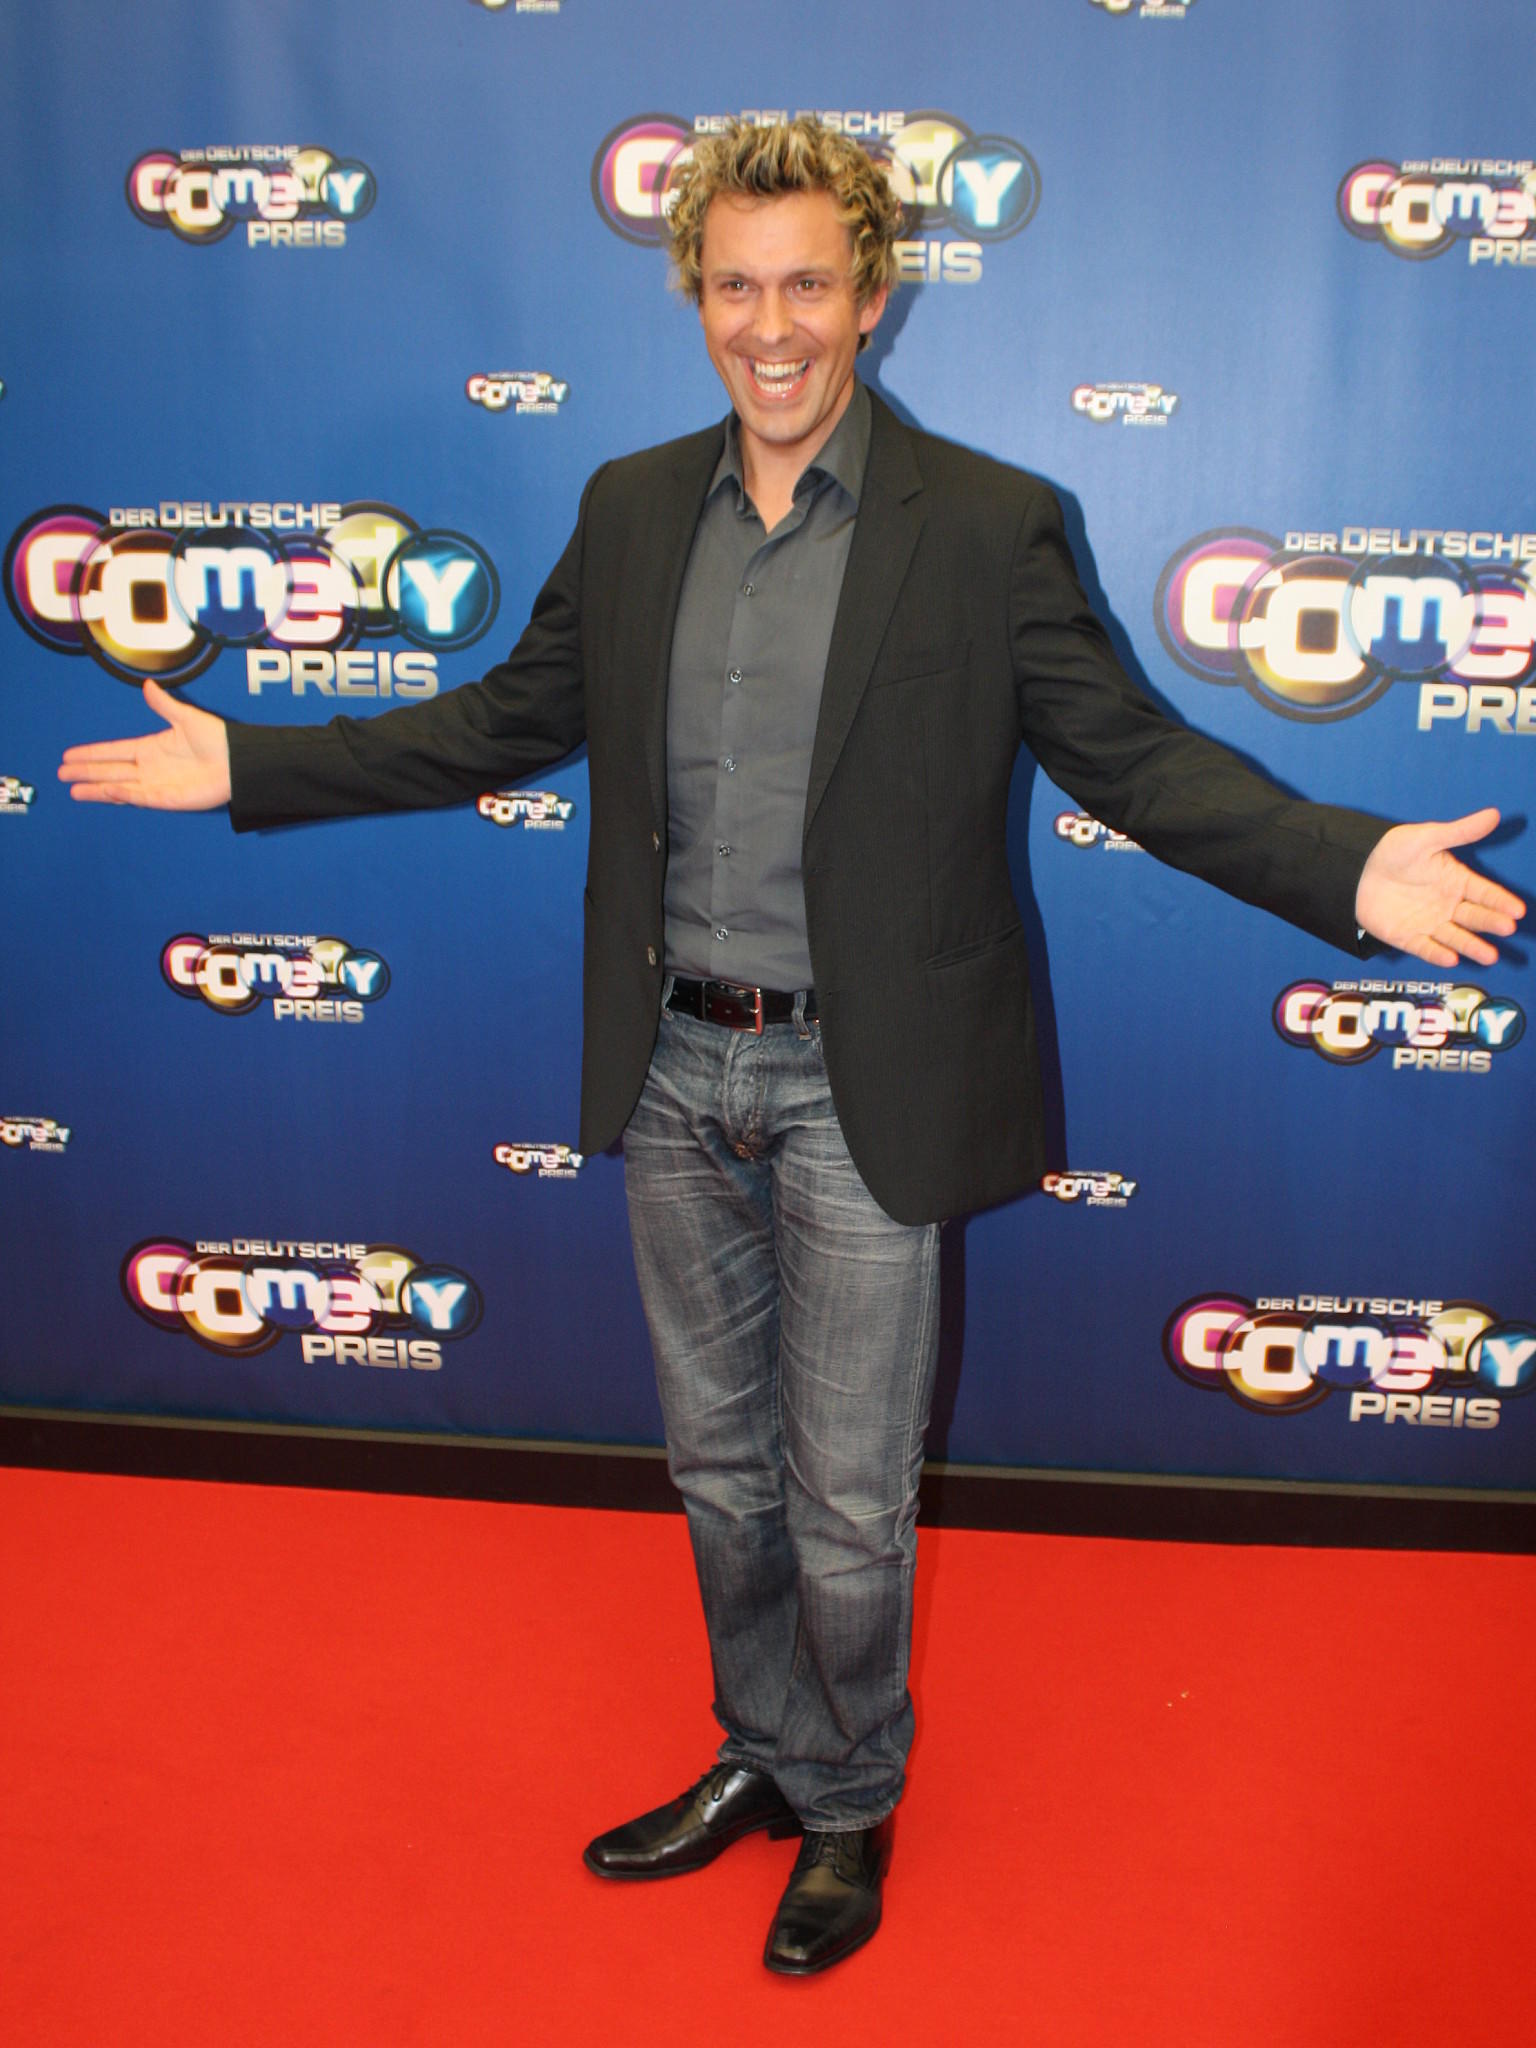 Comedypreis 2014: Style Roter Teppich Tops und Flops